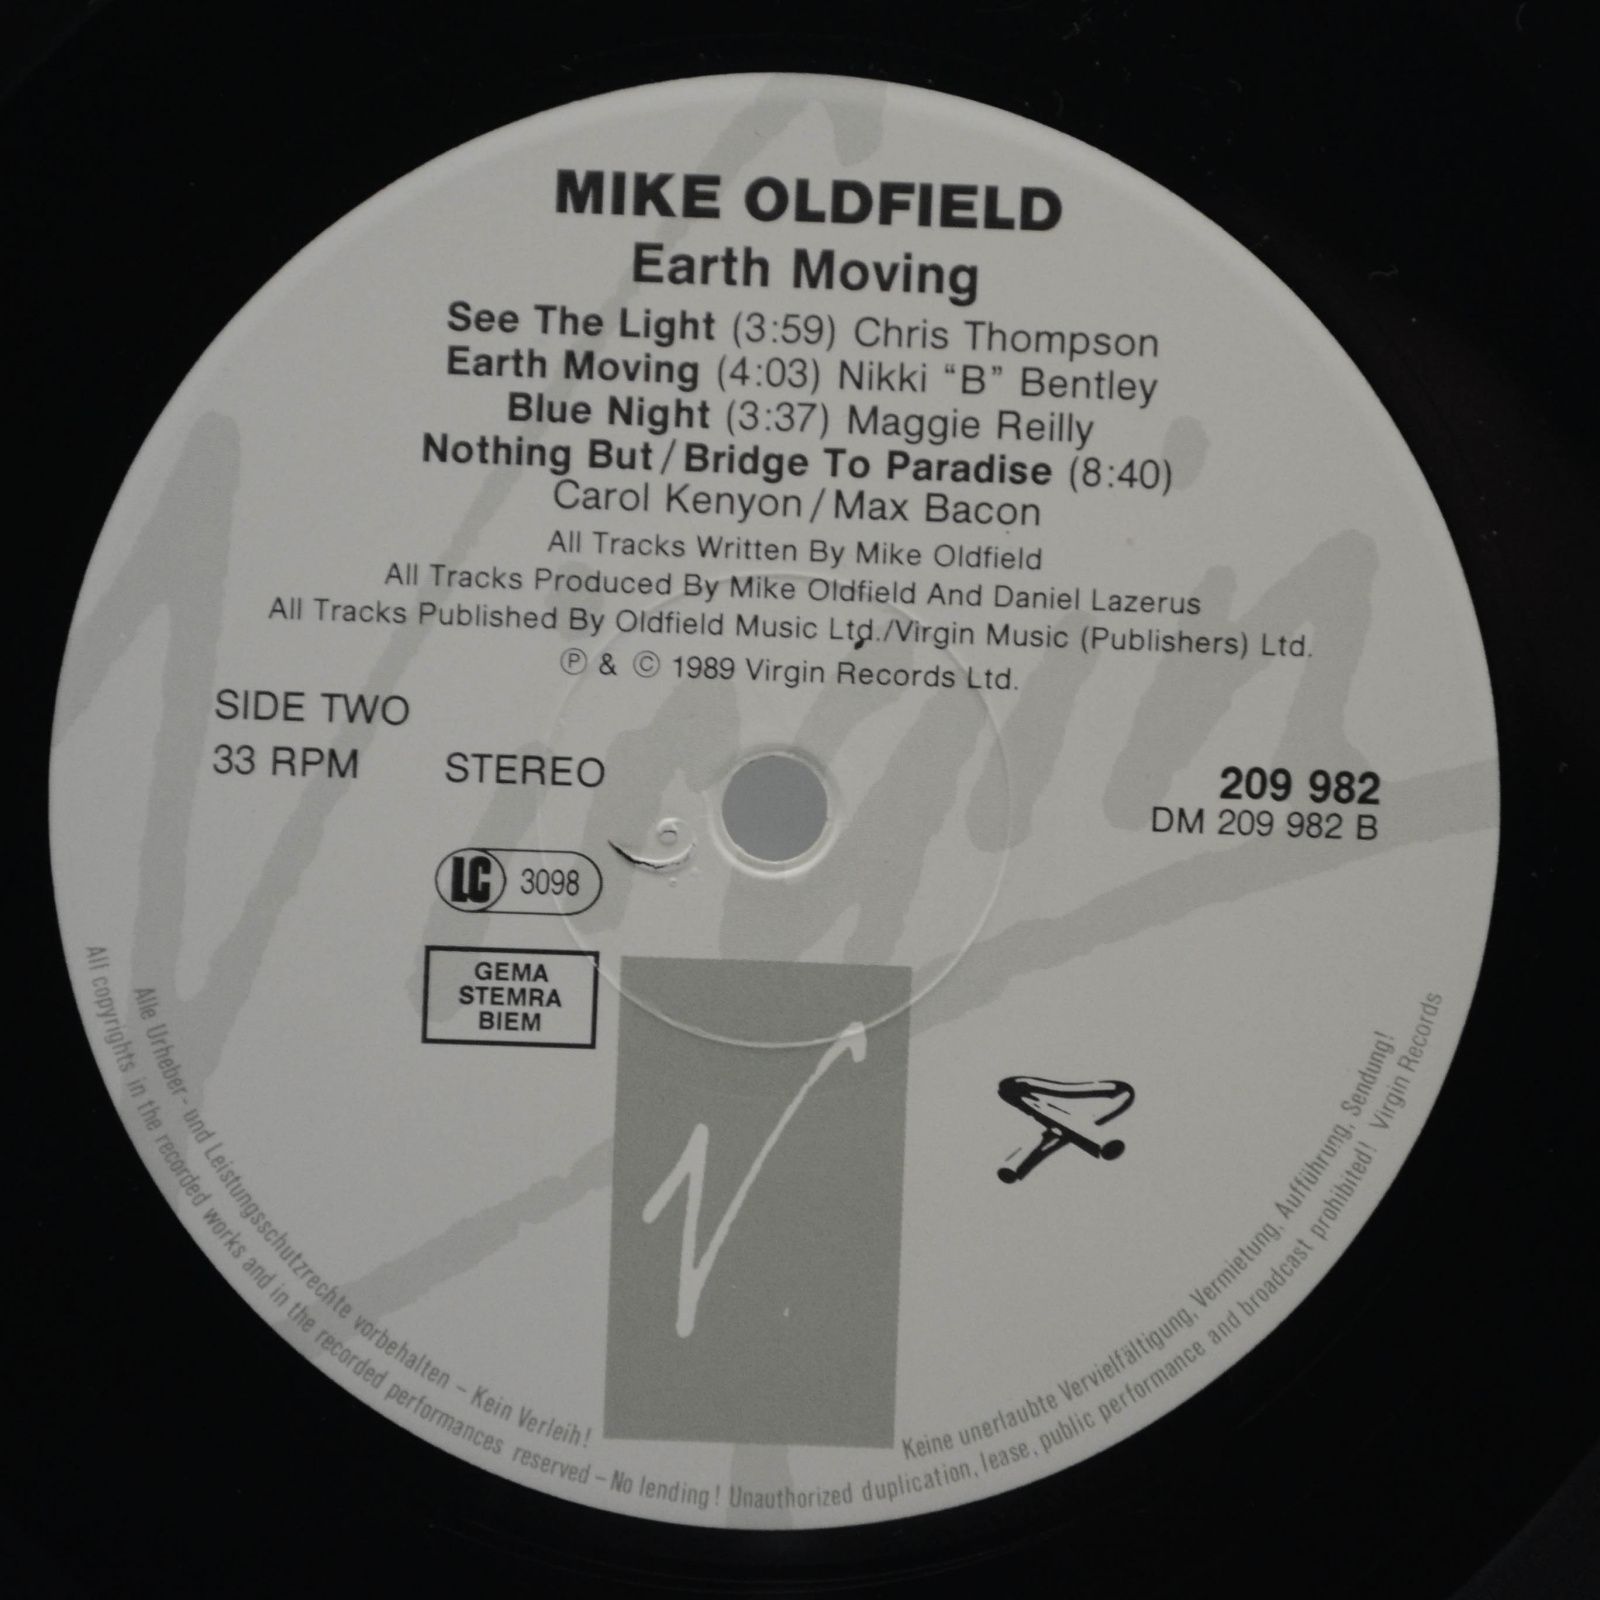 Mike Oldfield — Earth Moving, 1989